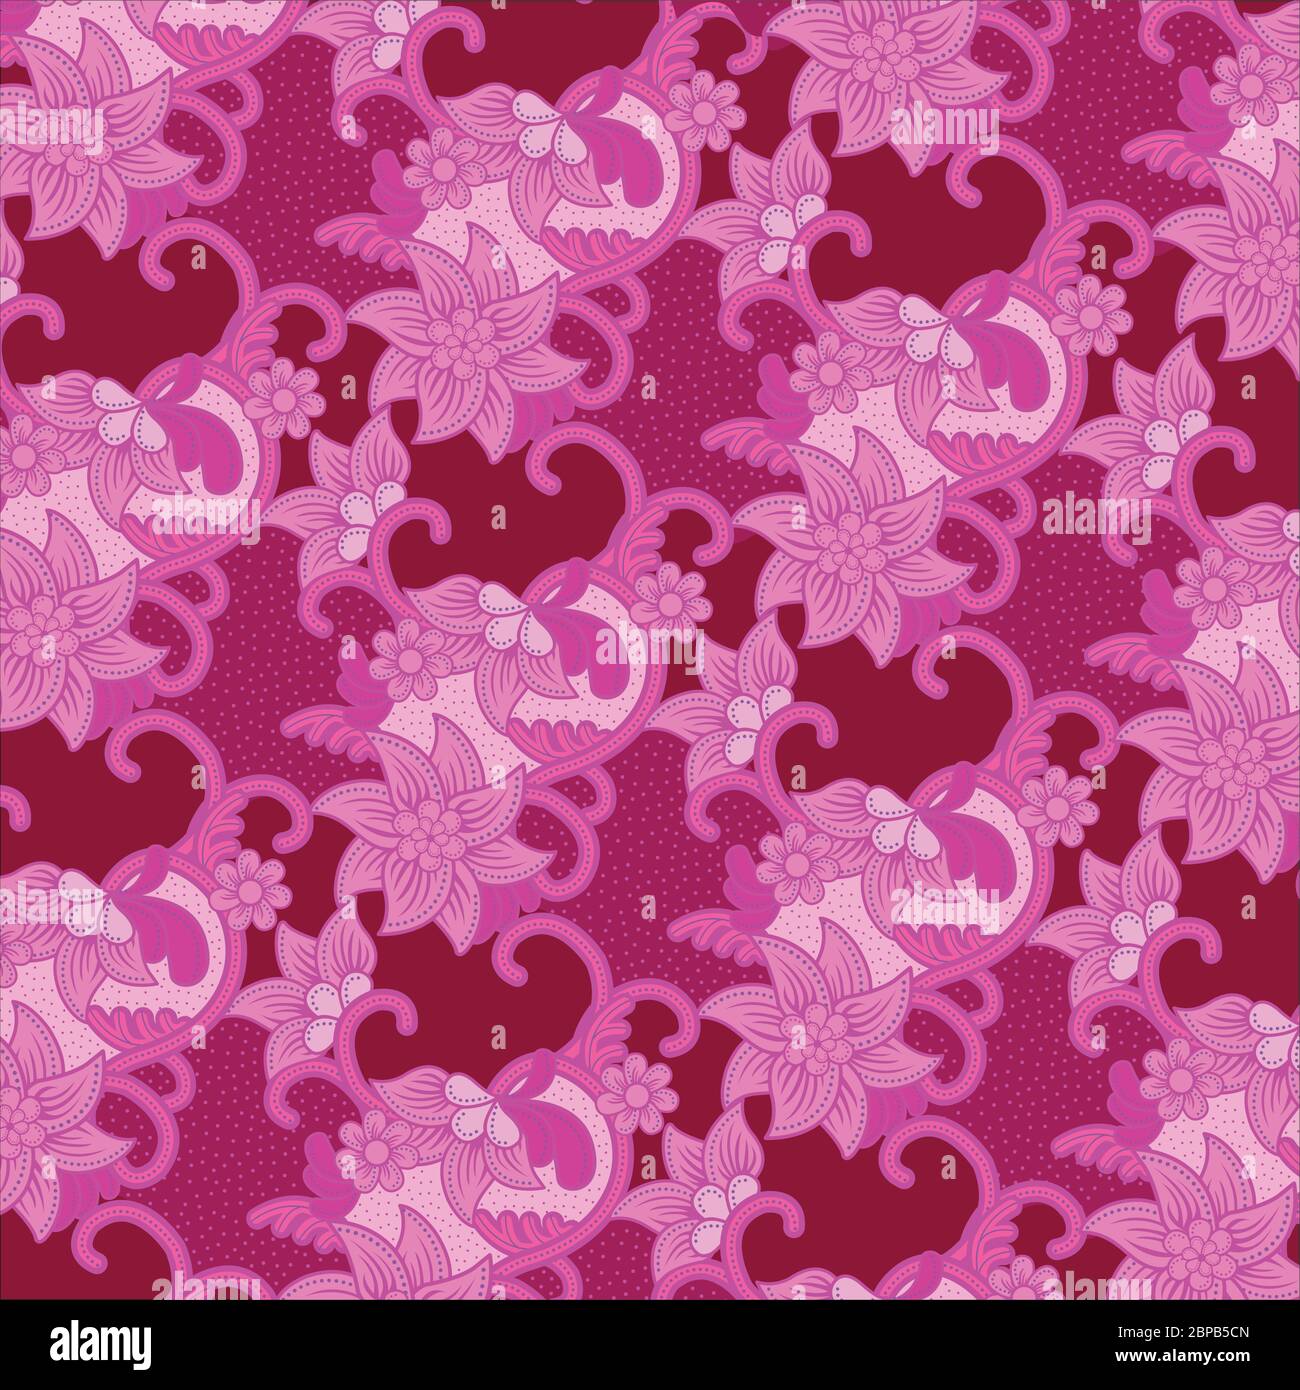 Traditional floral pattern batik drawing with dots and curly lines in pink tones. Batik is an Indonesian technique of wax-resist dyeing. Stock Vector